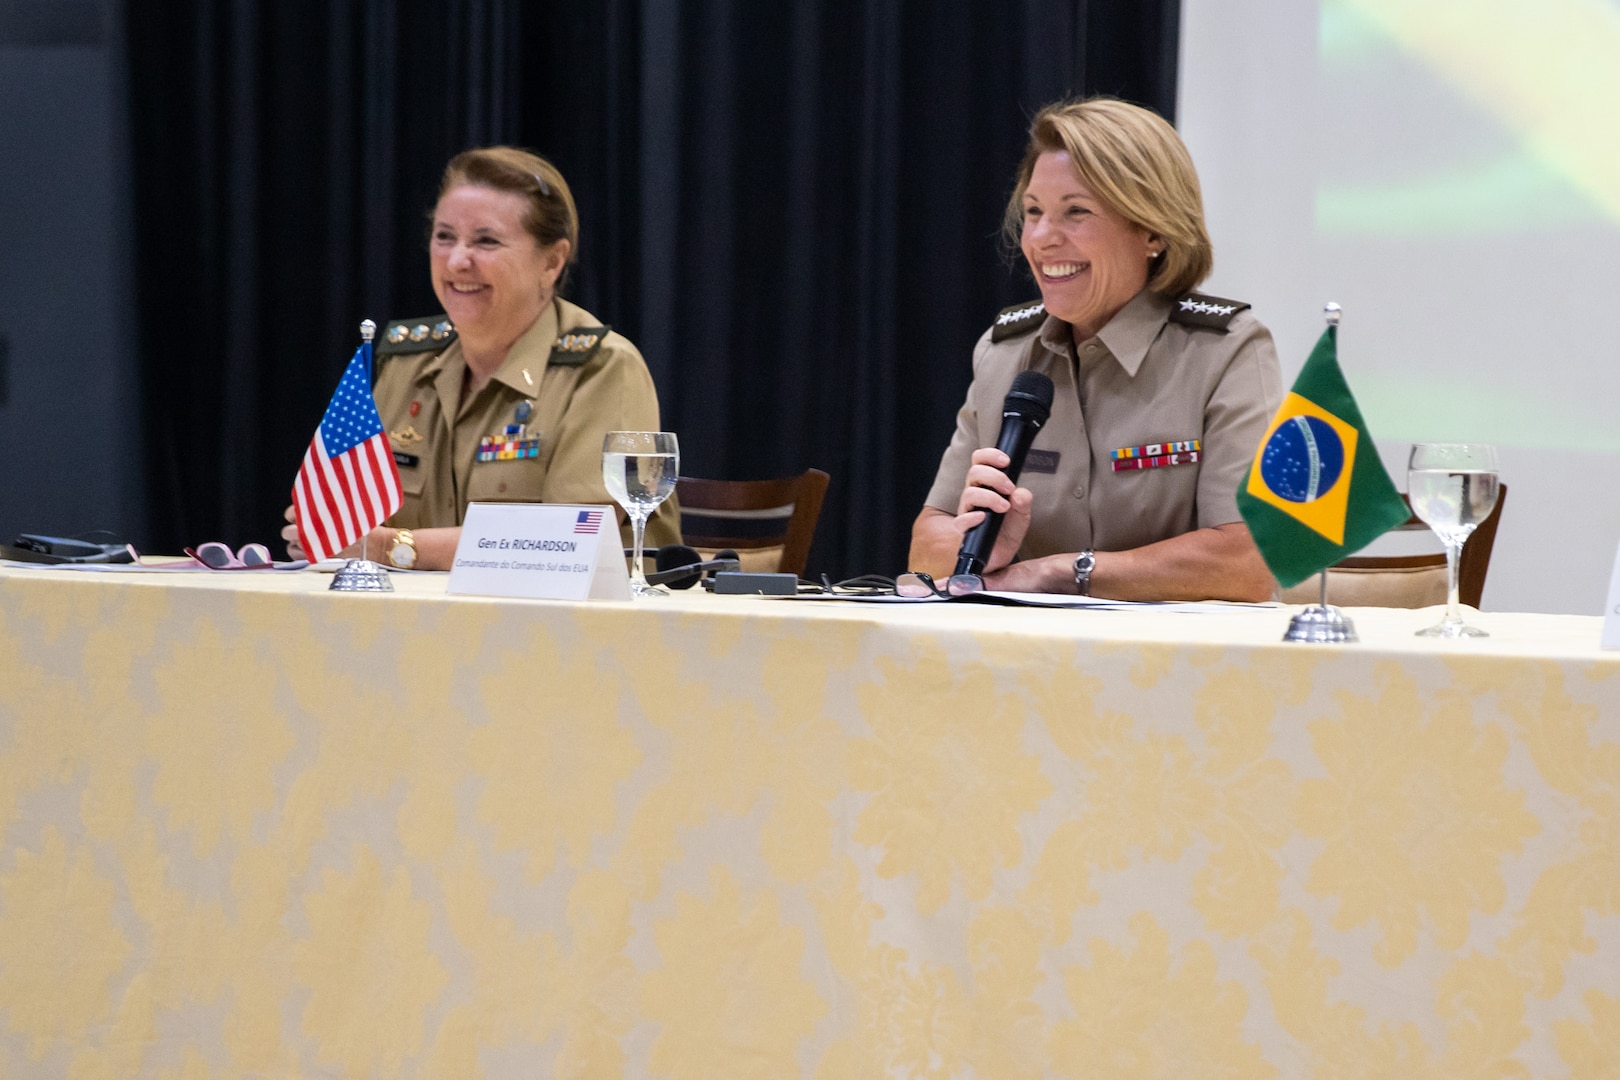 BRASILIA, Brazil (May 24, 2023) -- U.S. Army Gen. Laura Richardson, commander of U.S. Southern Command, joins U.S. Ambassador to Brazil Elizabeth Frawley Bagley, Brazil military leaders and service members to discuss the role of women in security during an event focused on Women, Peace, and Security aims.